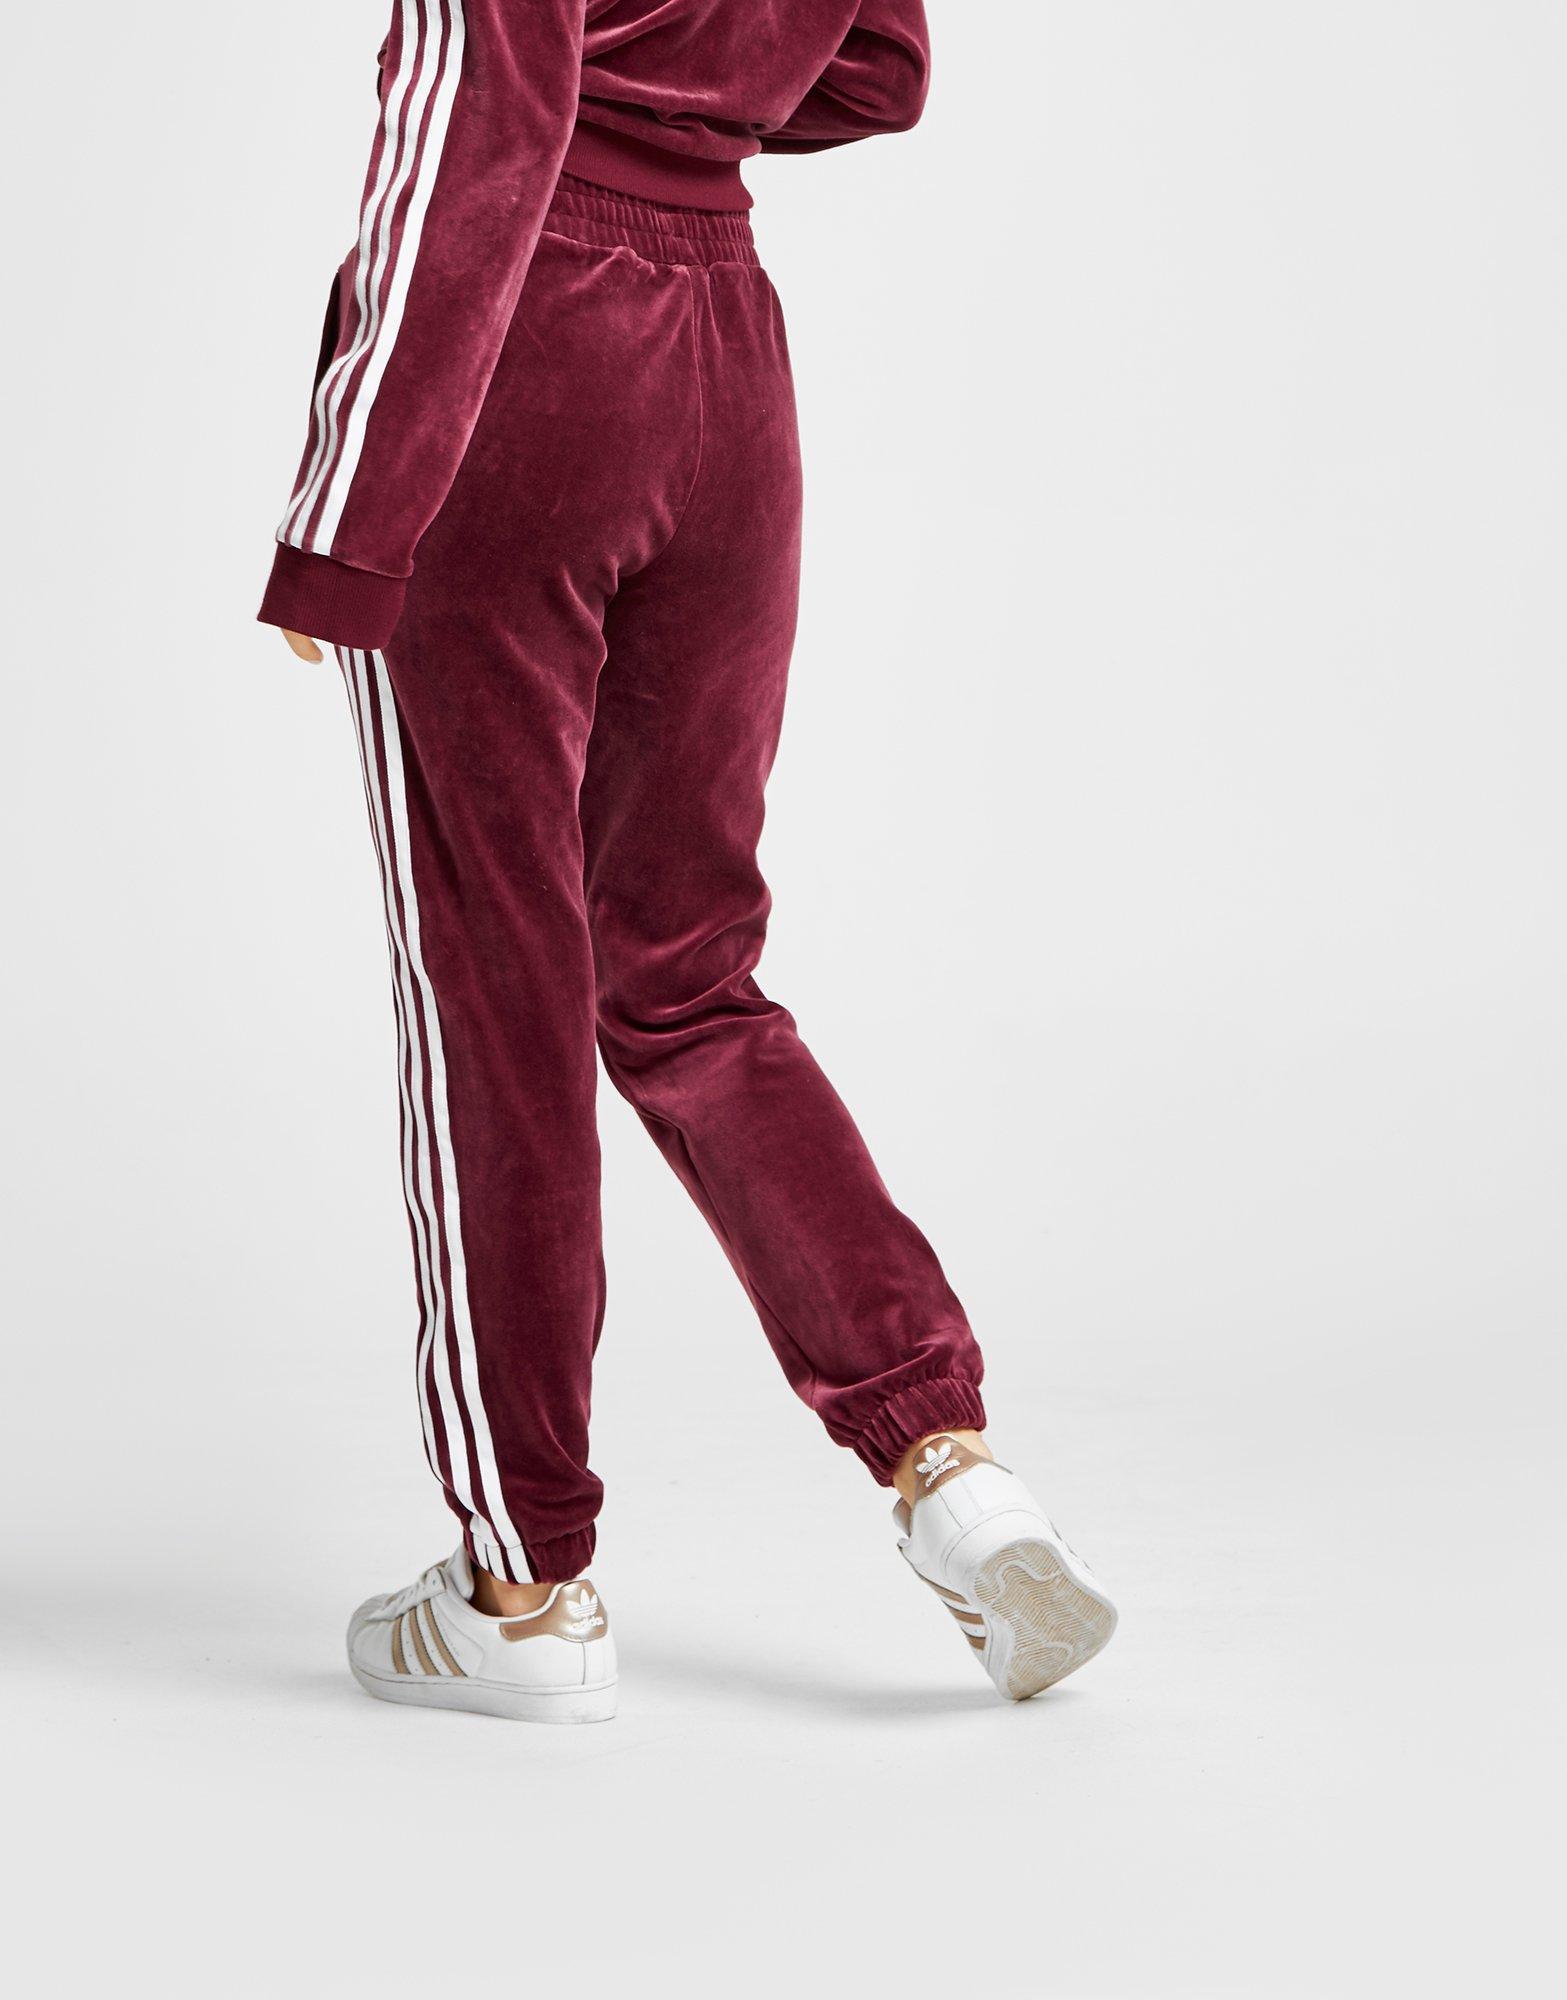 adidas Originals 3-stripes Velvet Track Pants in Red/White (Red) - Lyst